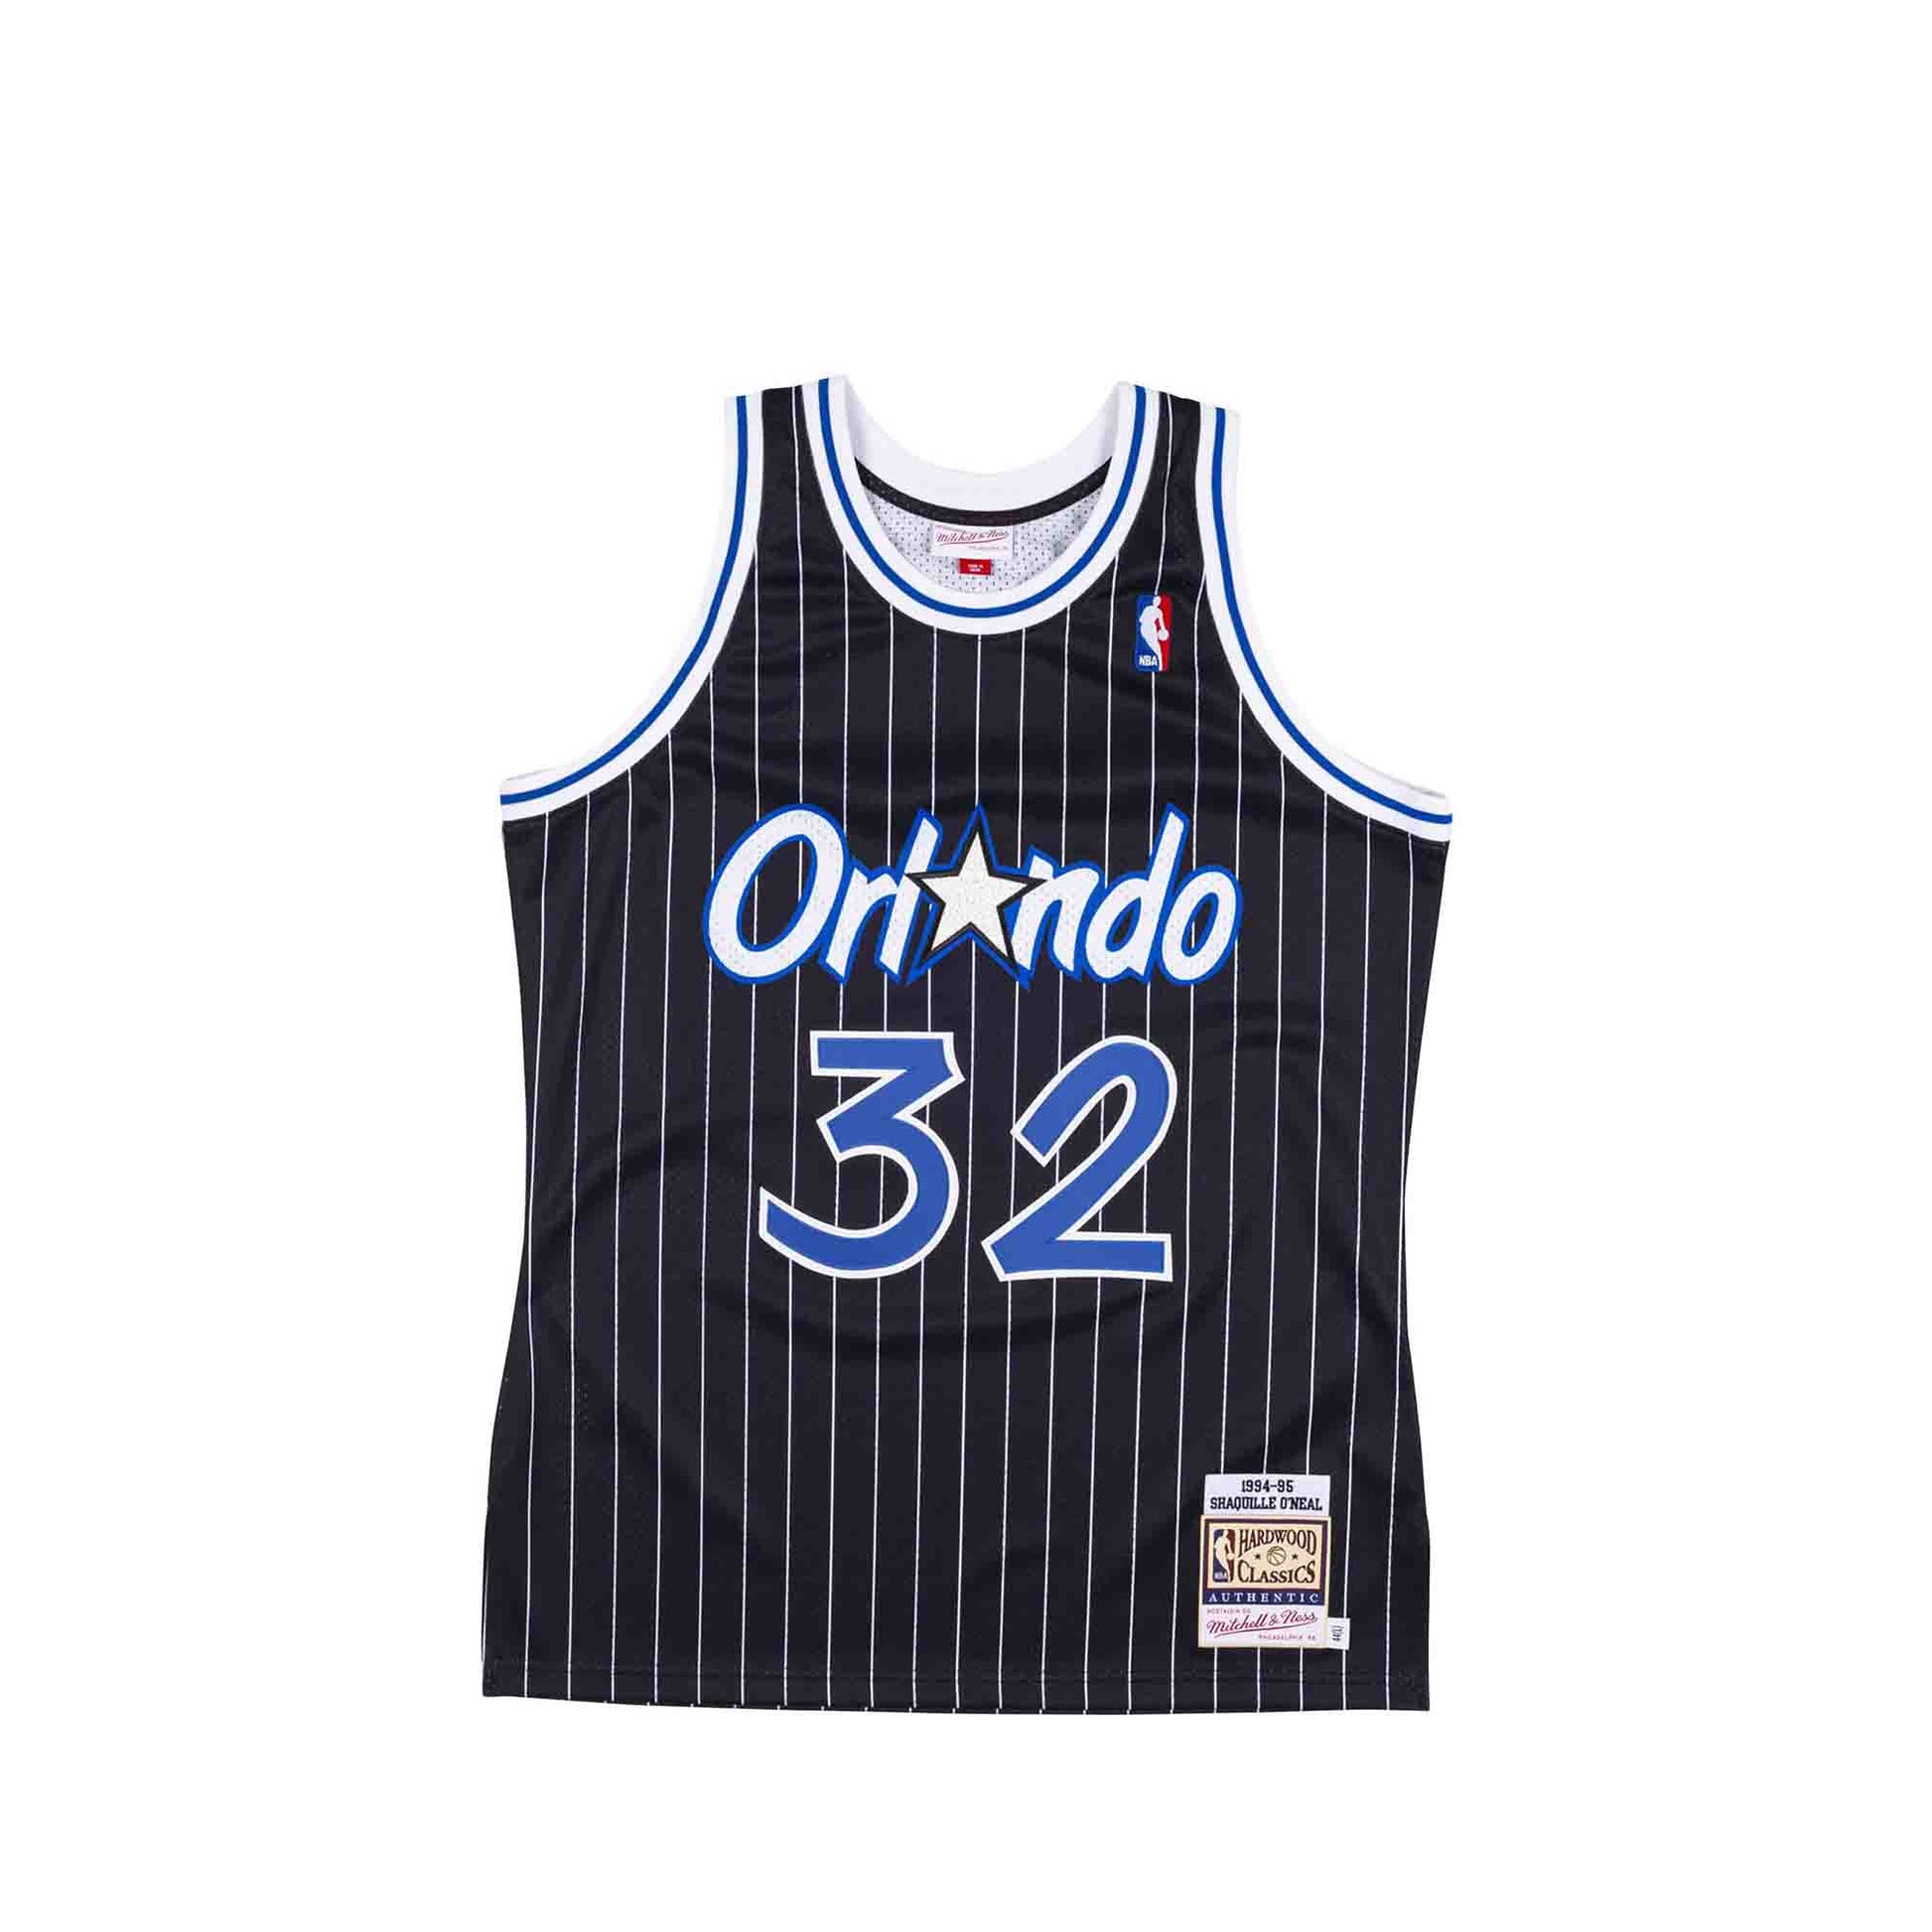 Shaquille O'Neal Jersey